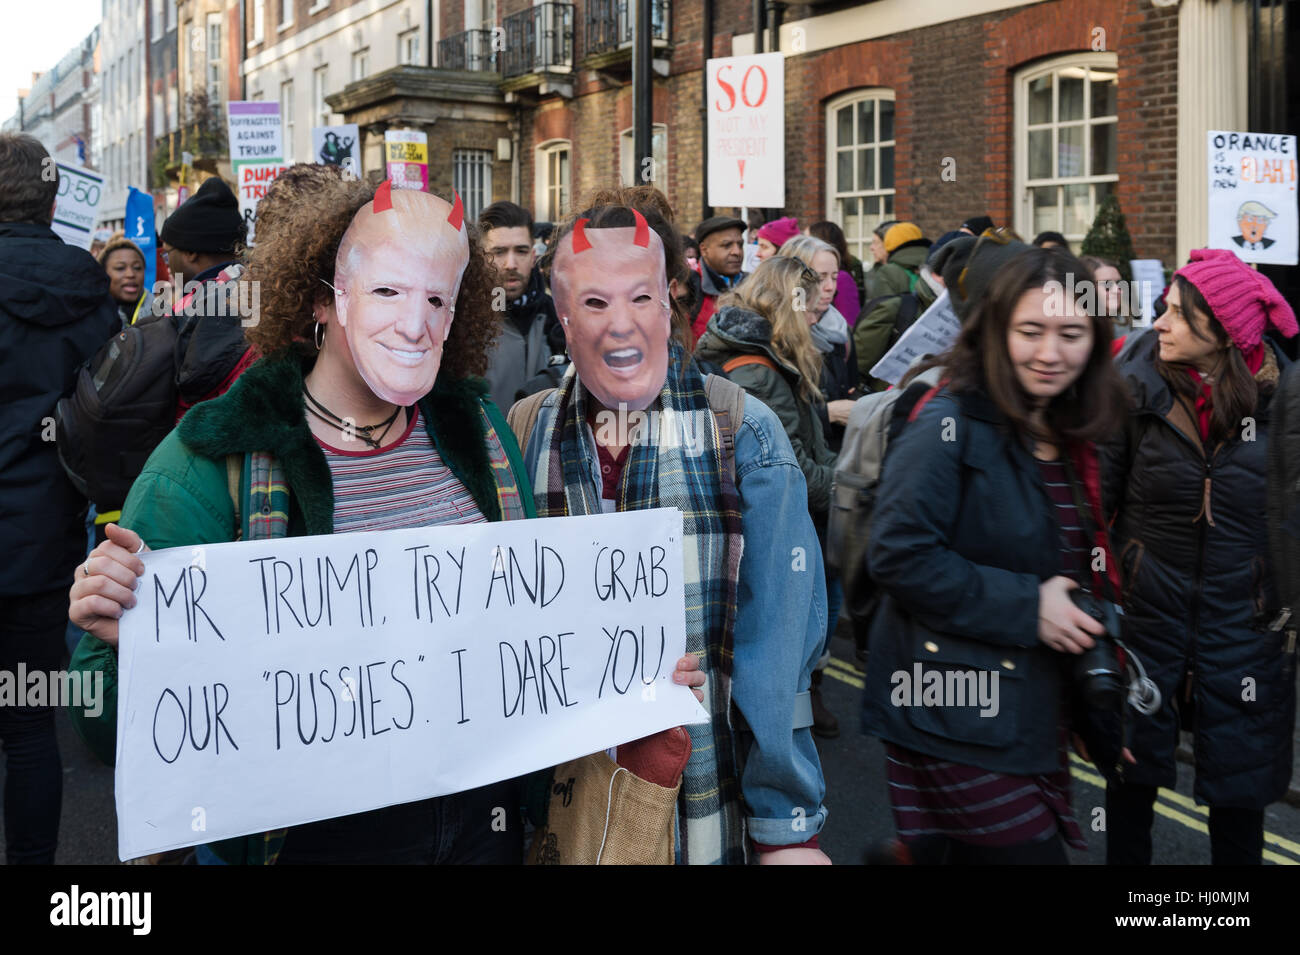 London, UK. 21st January 2017. Around 100,000 people attended 'Women's March on London' as part of a global day of action on the first day of Donald Trump's presidency. Participants marched from the location of the American embassy in Grosvenor Square to Trafalgar Square in a protest against the 'politics of fear' as well as to defend human rights for all and promote civil liberties. Wiktor Szymanowicz/Alamy Live News Stock Photo